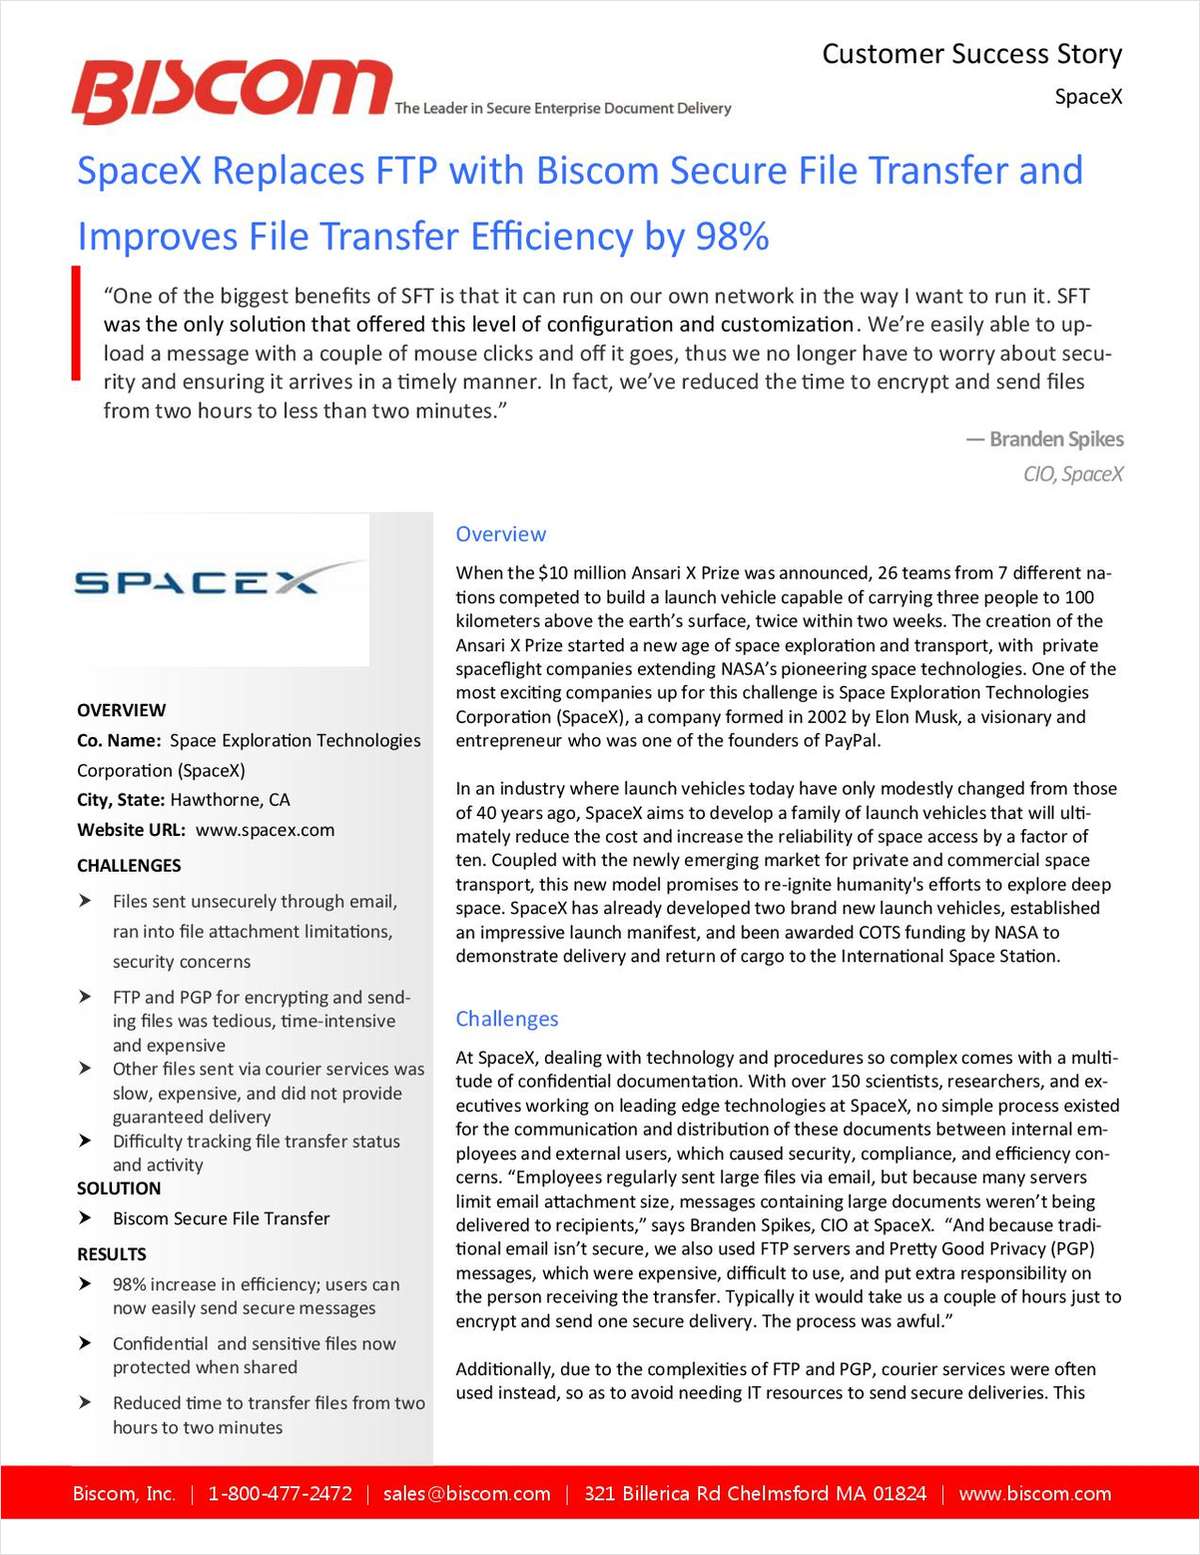 How To Replace FTP and Increase File Transfer Efficiency by 98% With Biscom Secure File Transfer -- A Customer Success Story